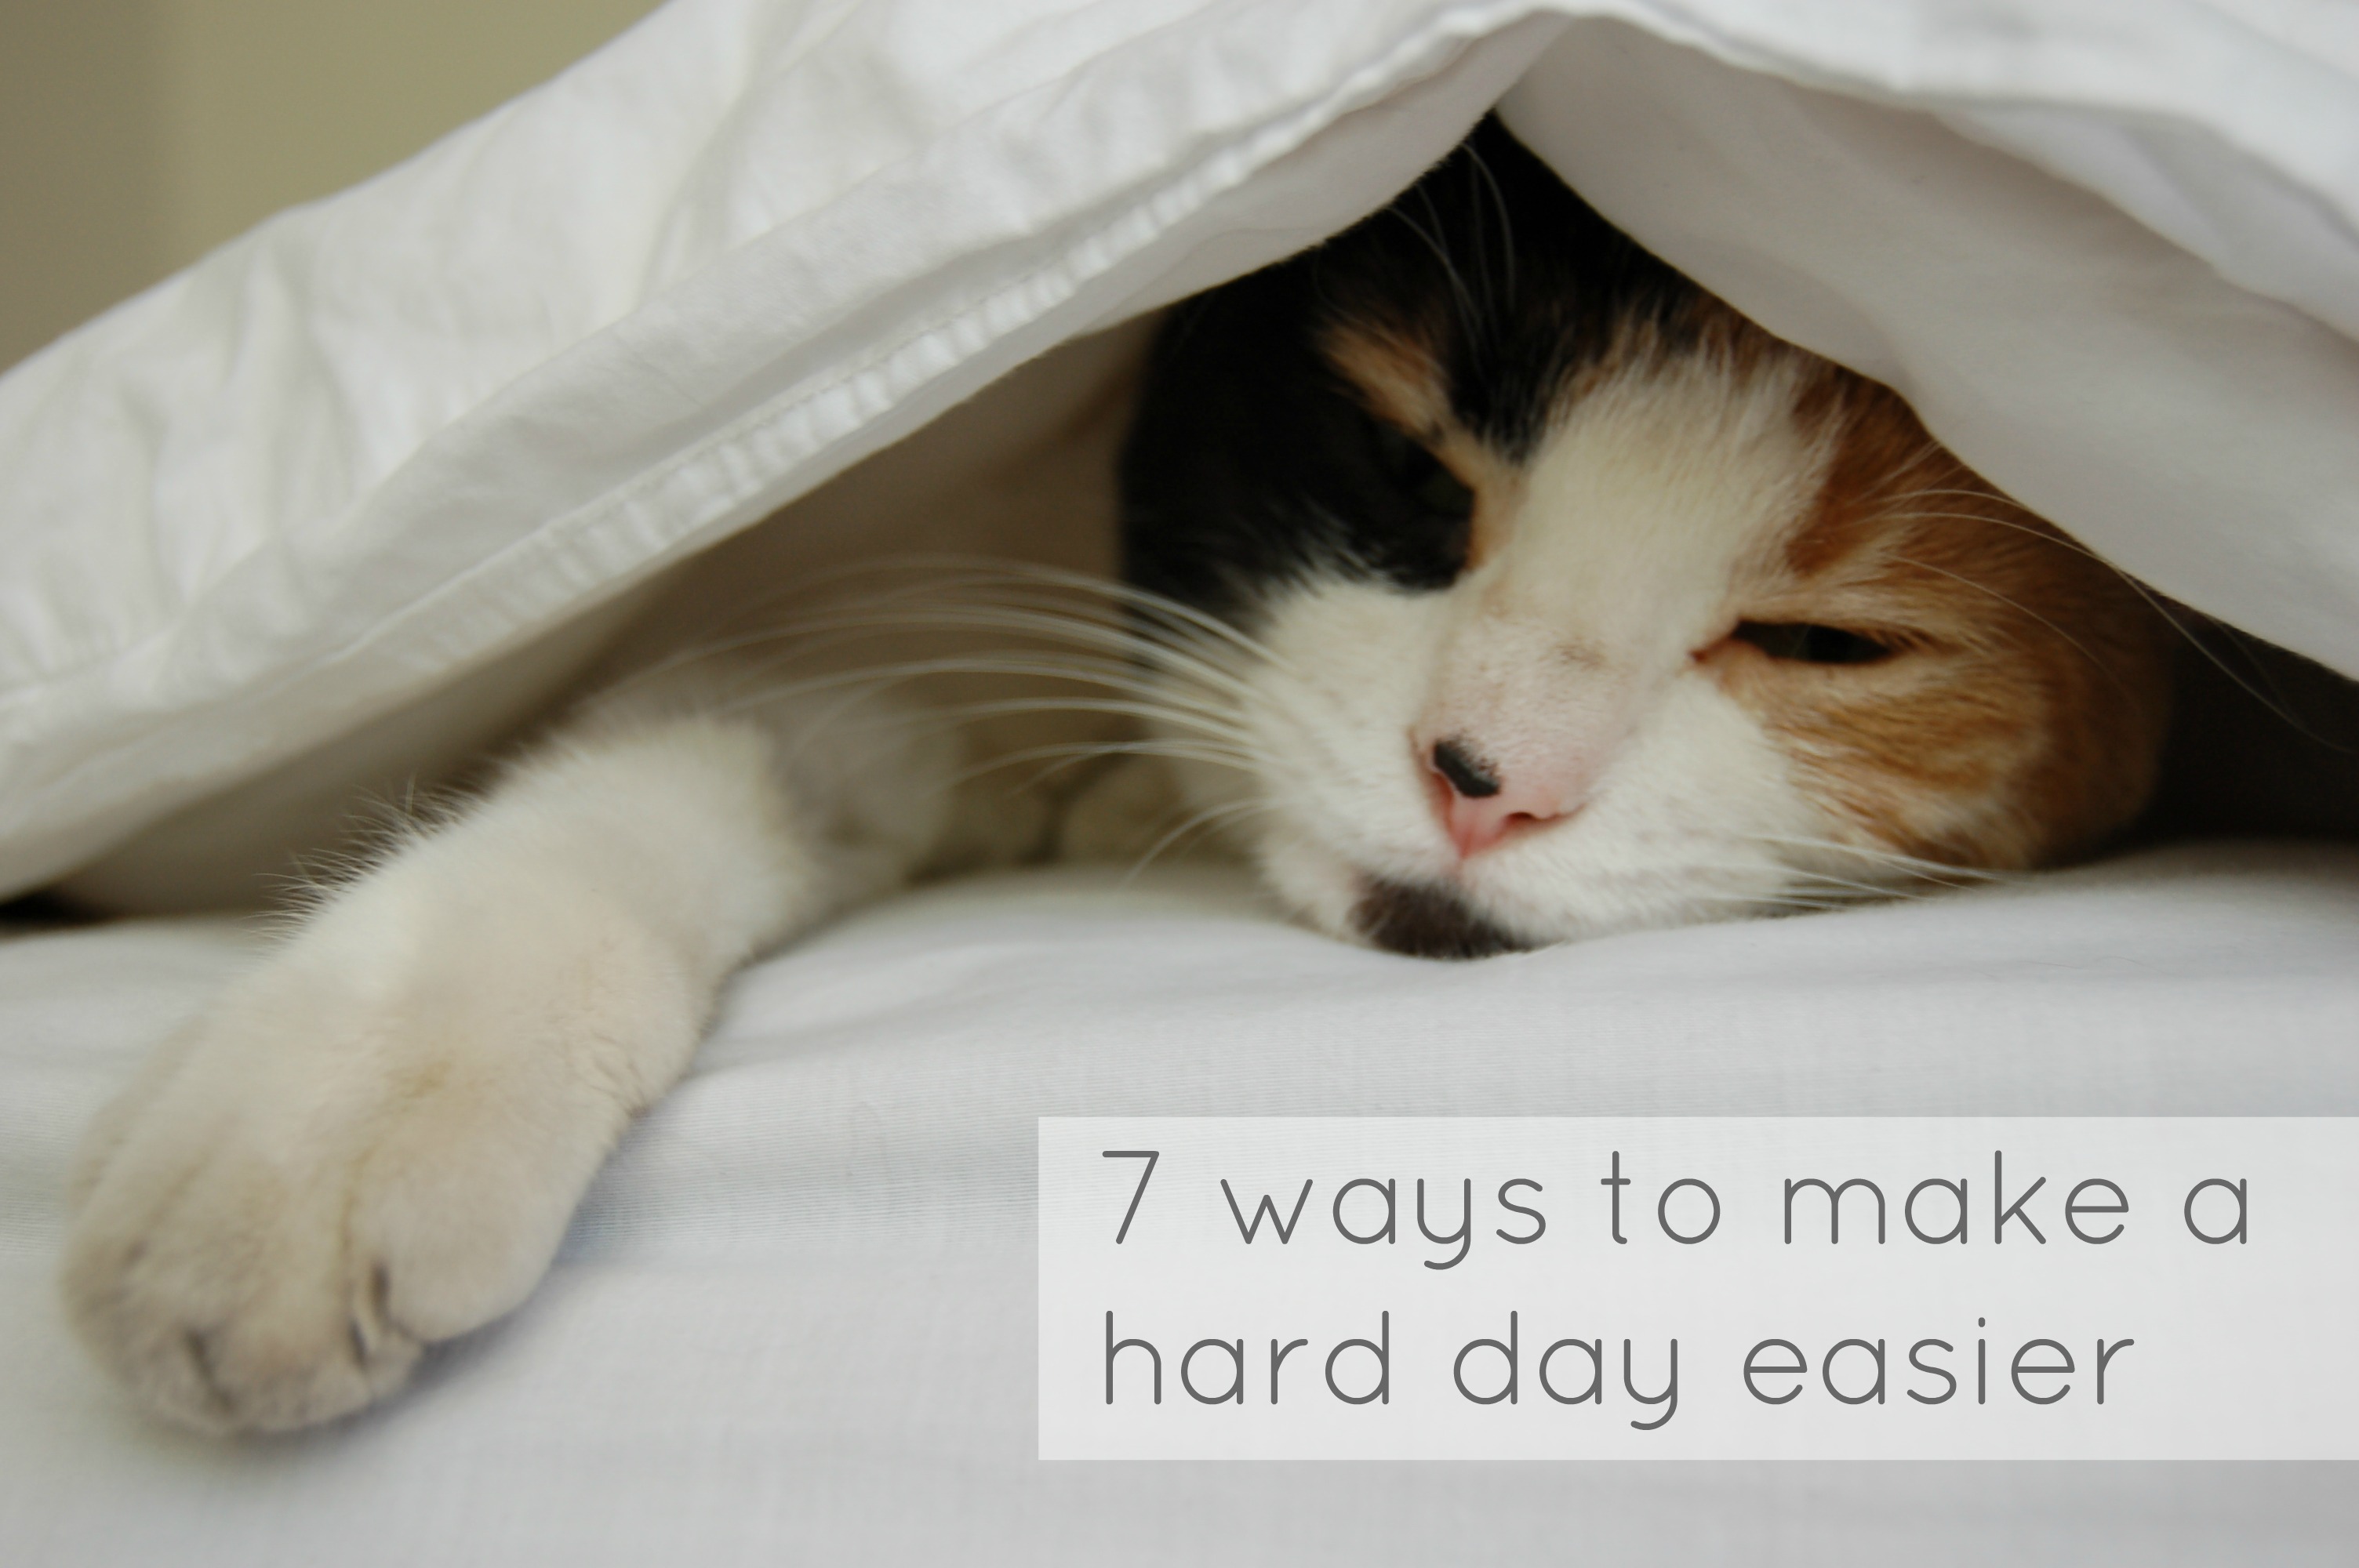 7 ways to make a hard day easier